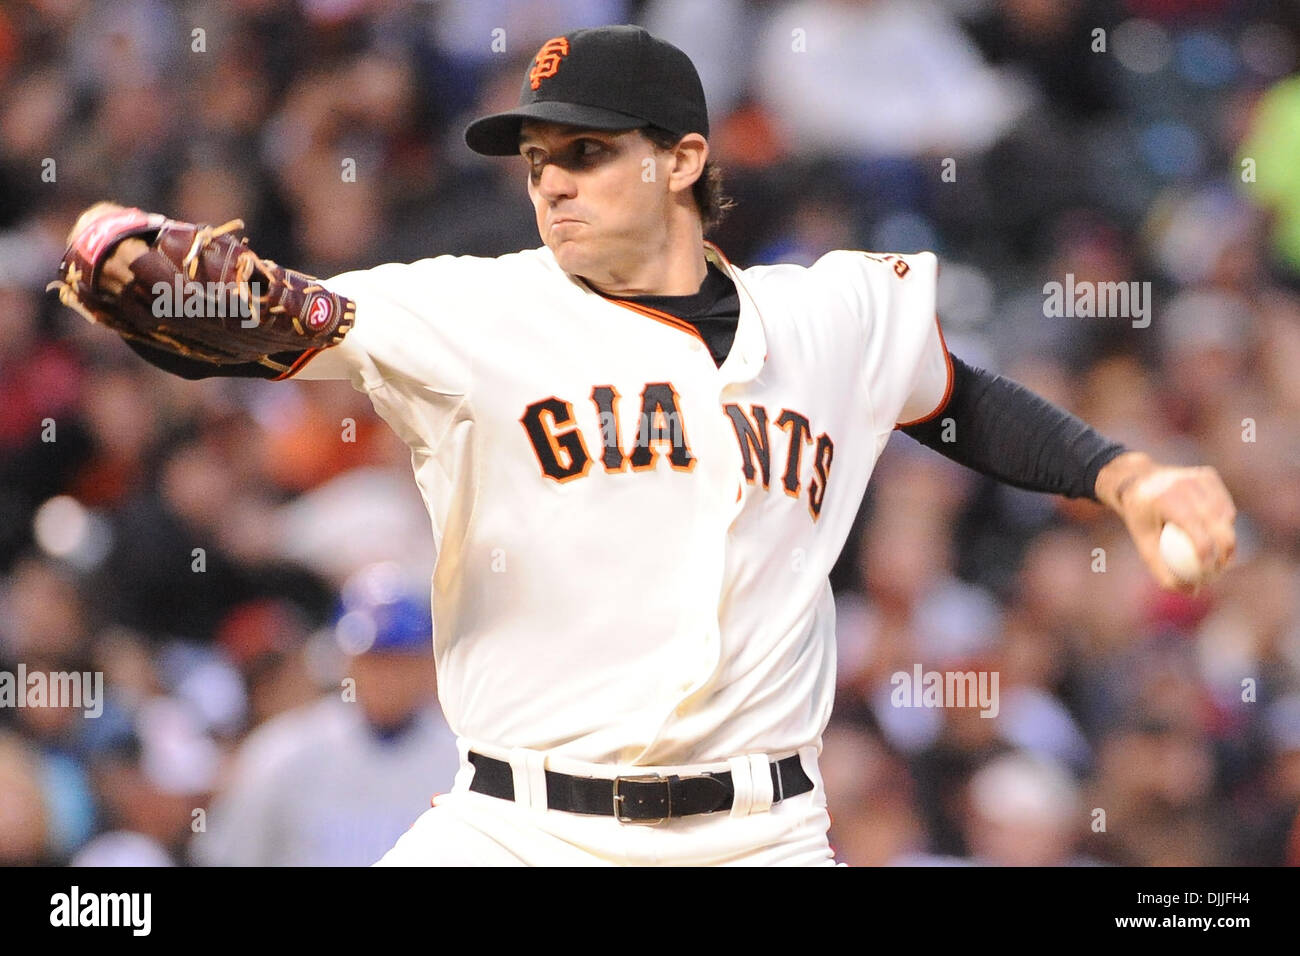 11 August, 2010: San Francisco Giants pitcher BARRY ZITO (#75) pitches the ball at AT&T Park in San Francisco, California. The San Francisco Giants defeated the Chicago Cubs 5-4. (Credit Image: © Charles Herskowitz/Southcreek Global/ZUMApress.com) Stock Photo